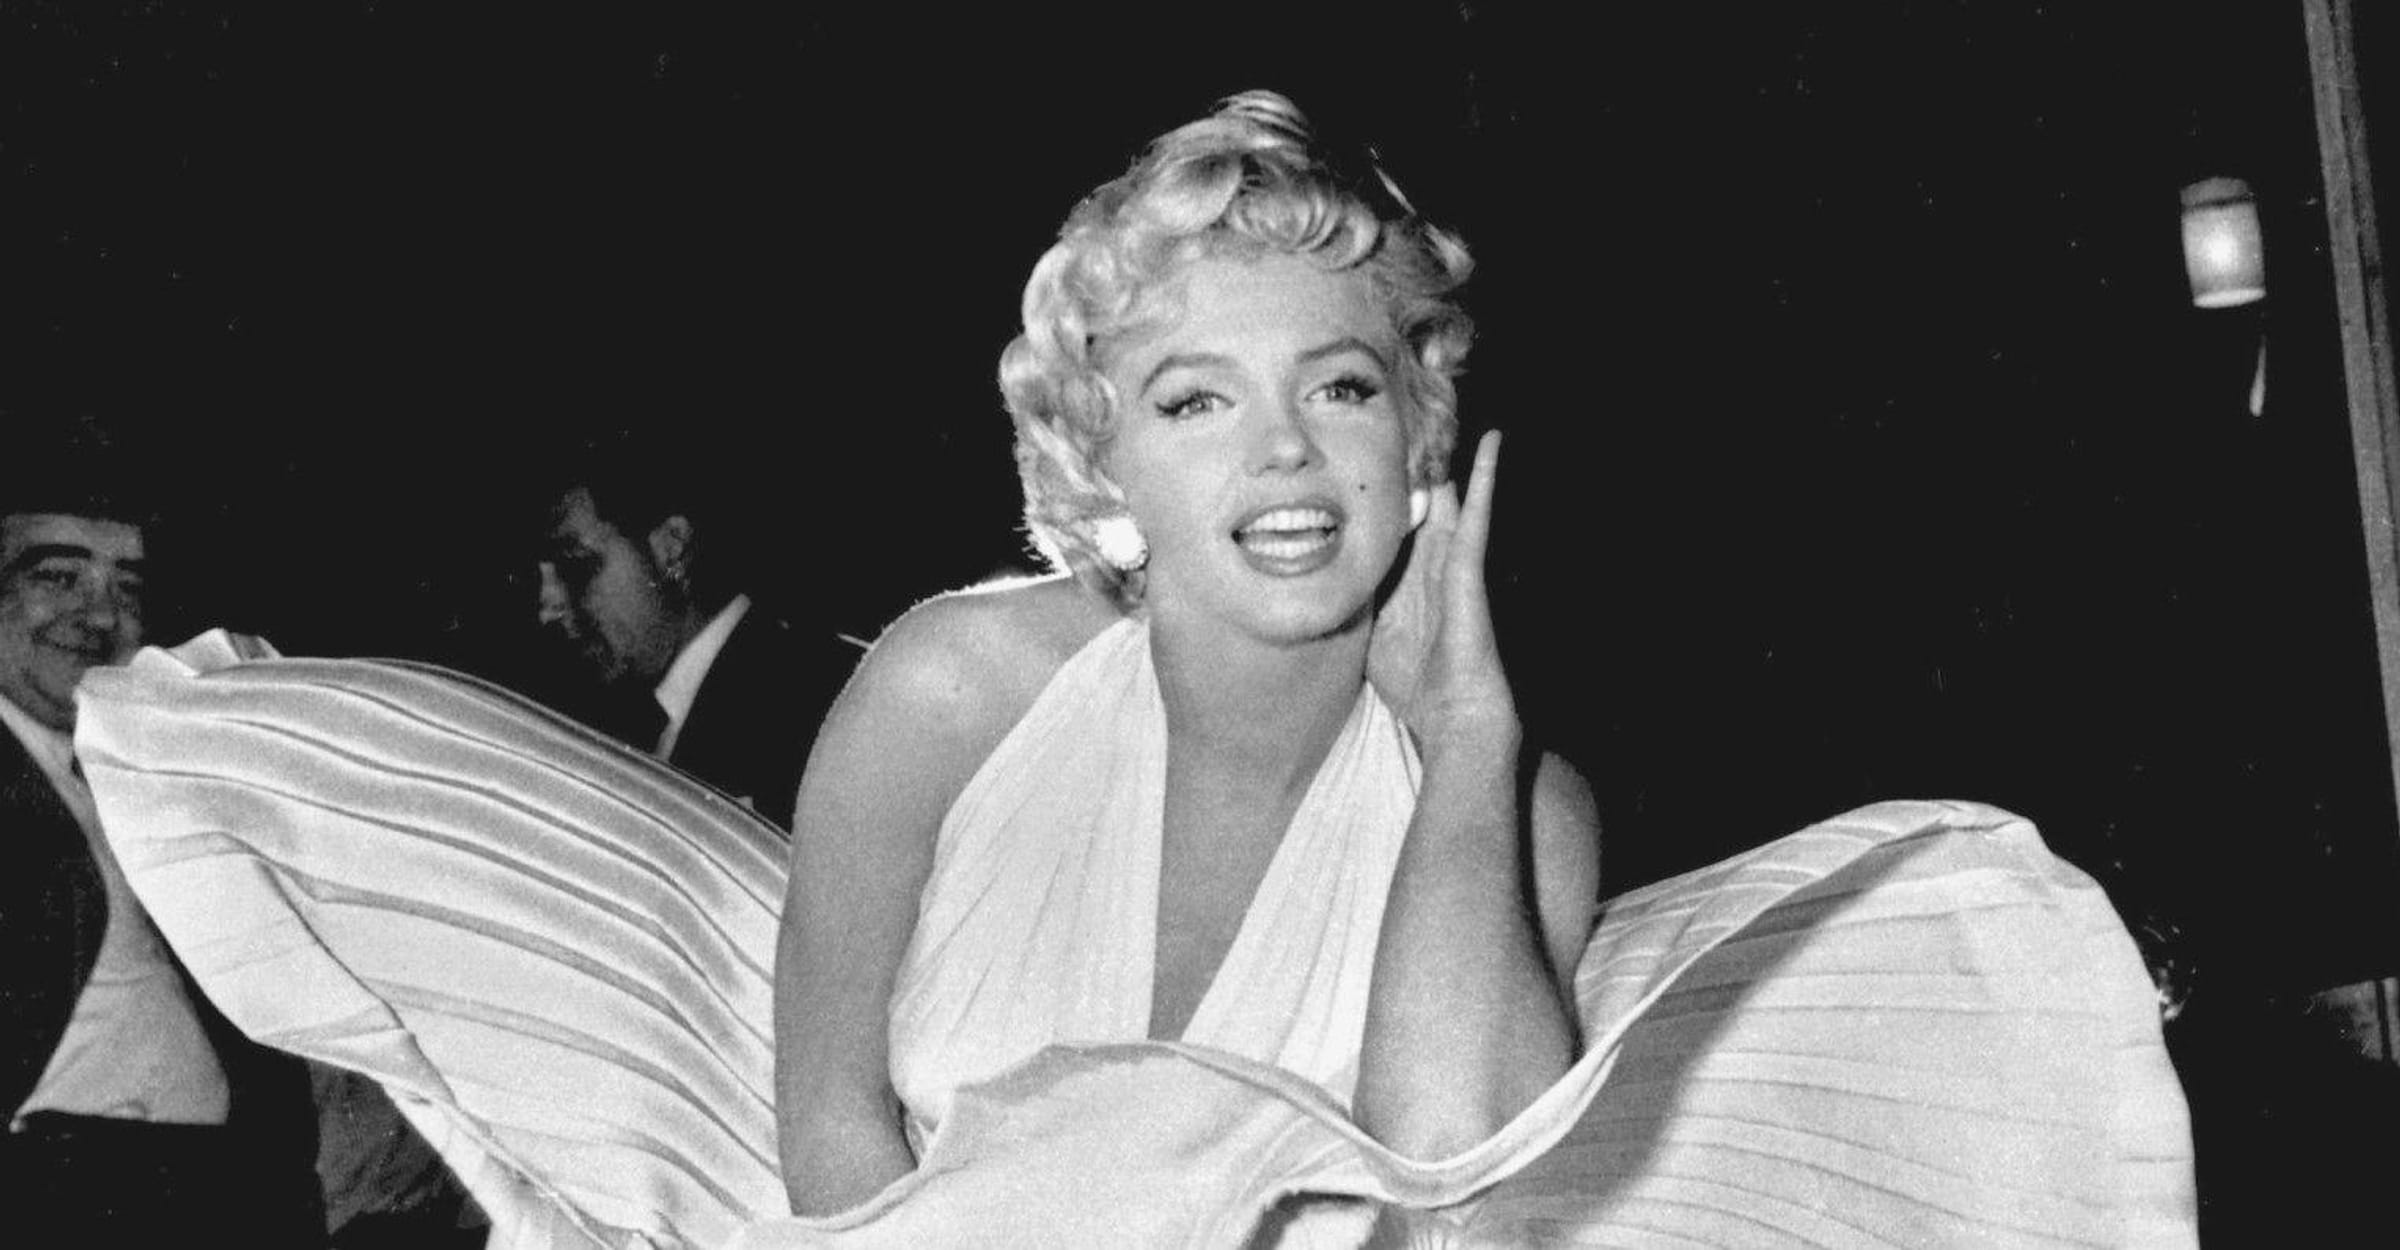 1950s Interracial Porn Stars - List of Famous 50s Actresses